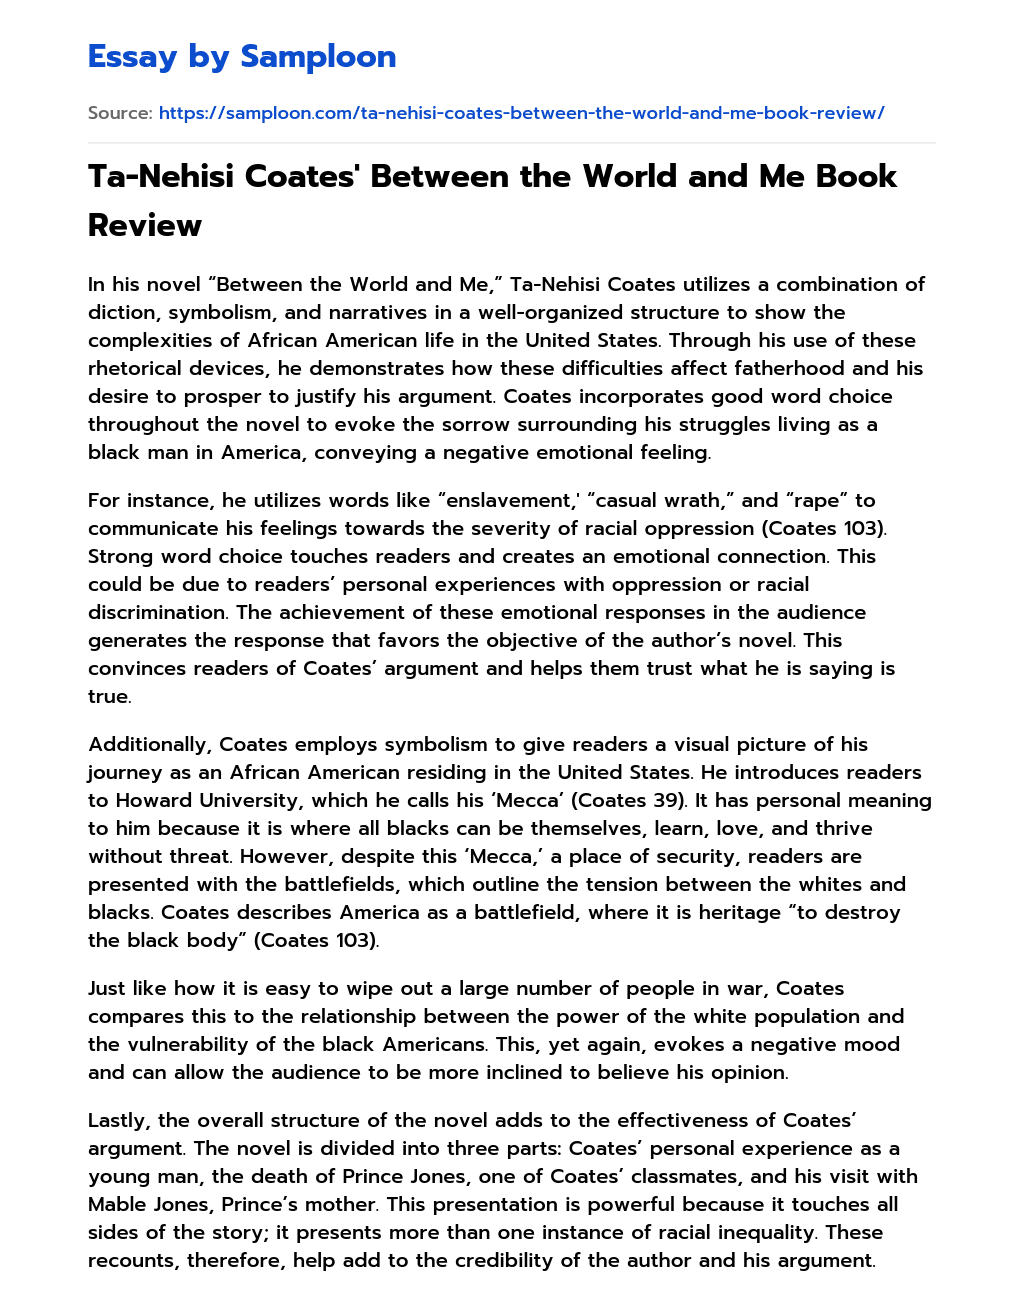 Ta-Nehisi Coates’ Between the World and Me Book Review essay